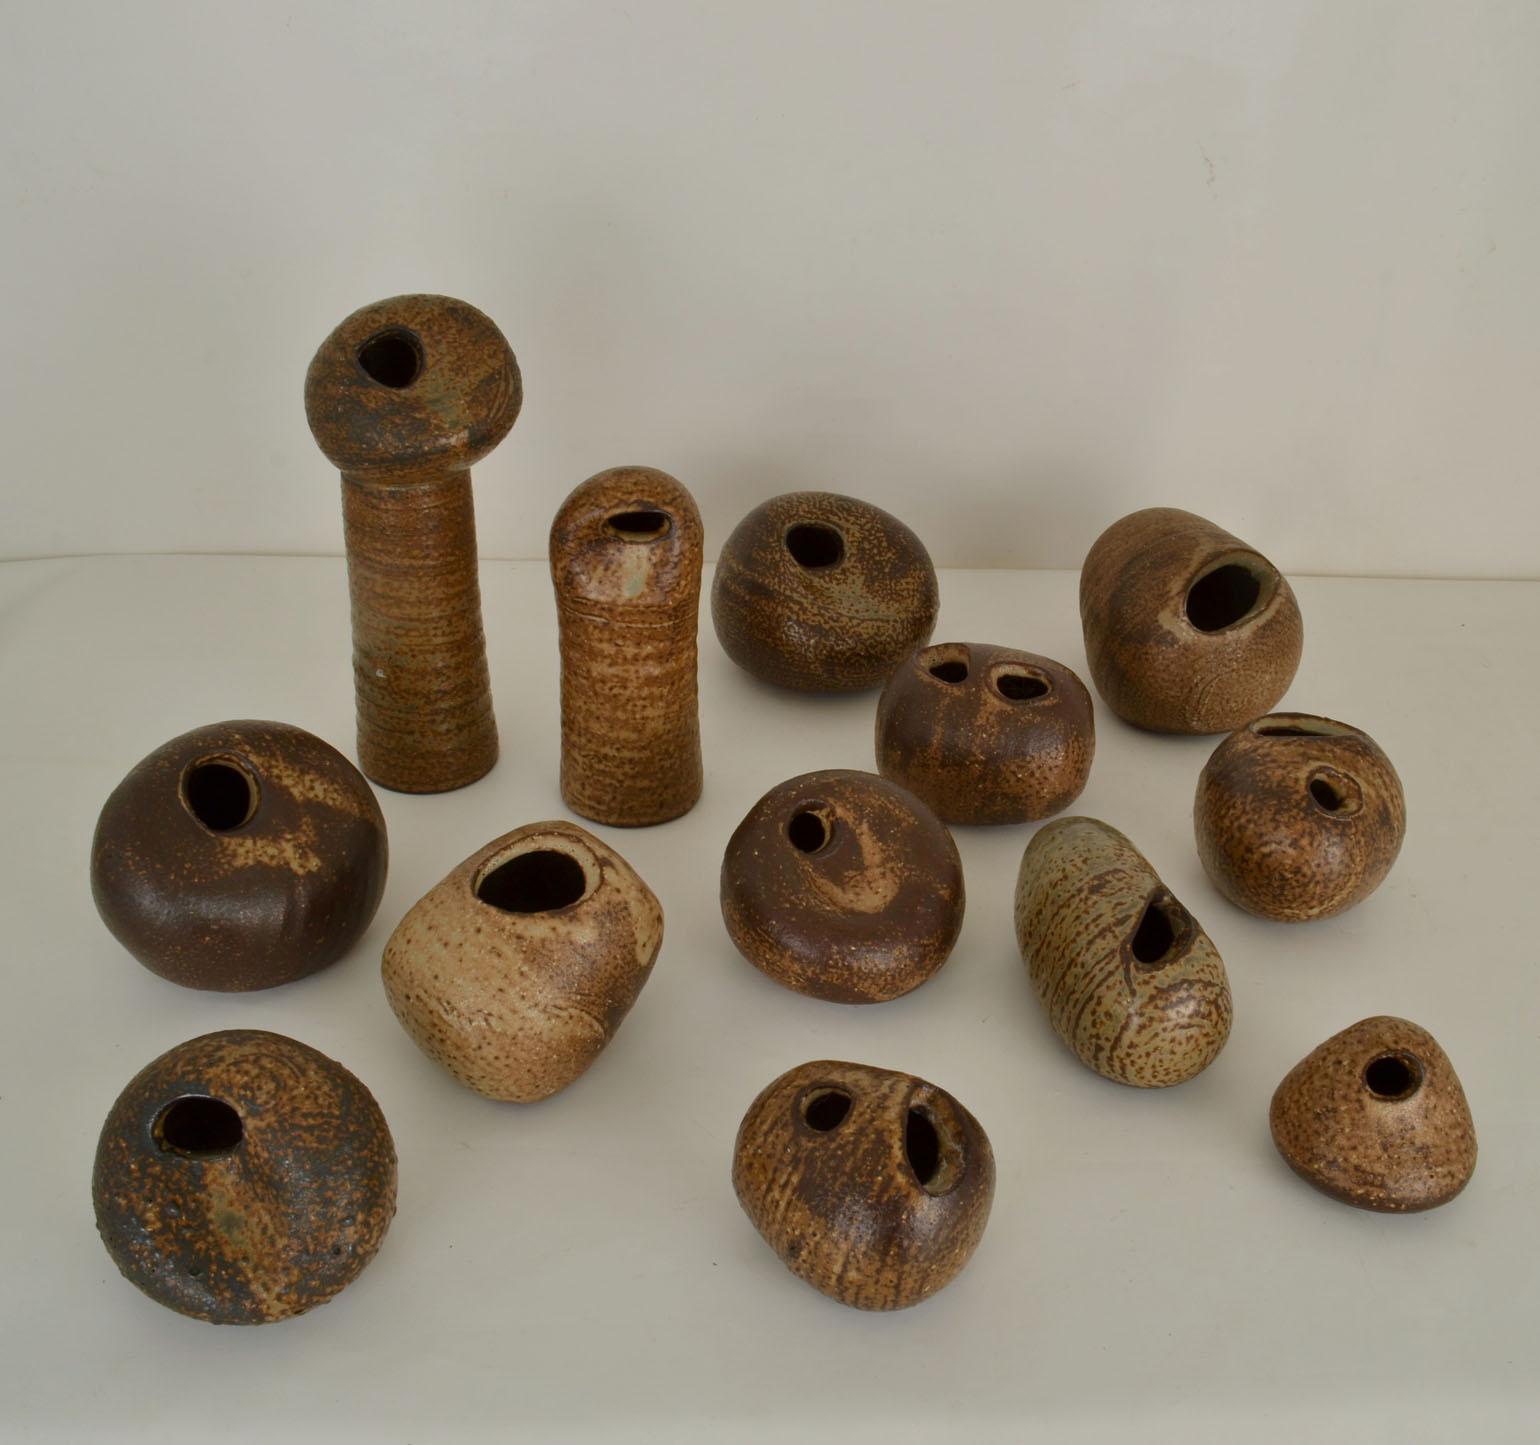 Group of Studio Ceramic Free Form Pebble Vases in Earth Tones by Jaan Mobach For Sale 7